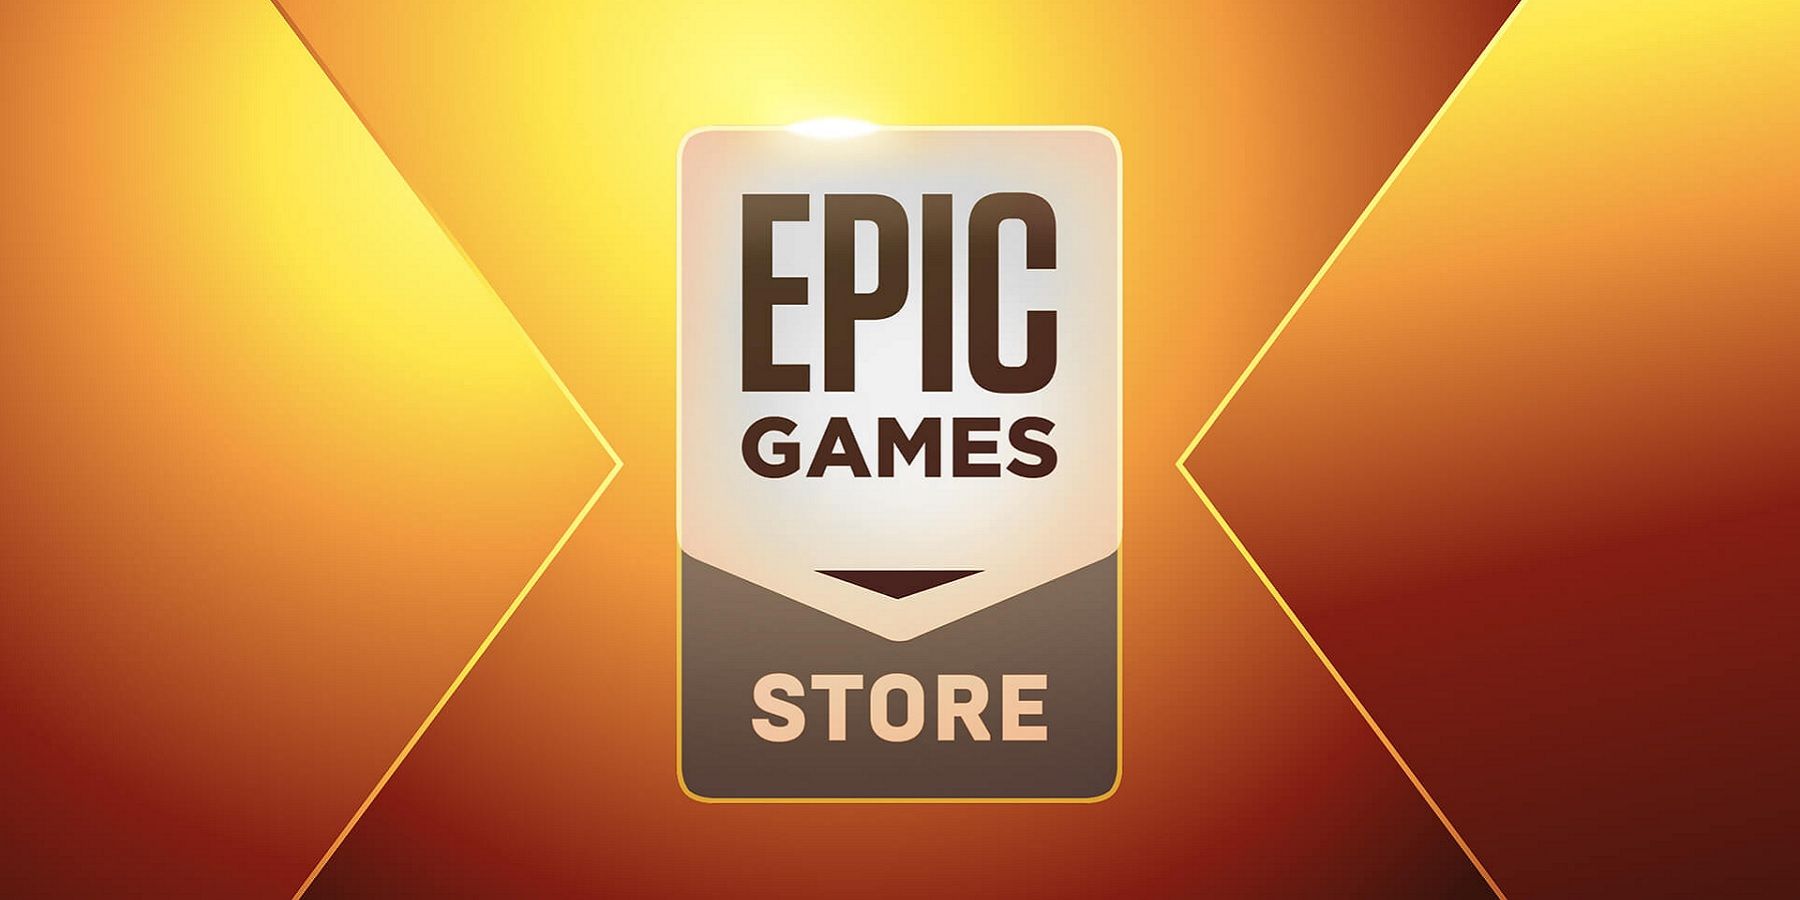 epic games store logo gold background